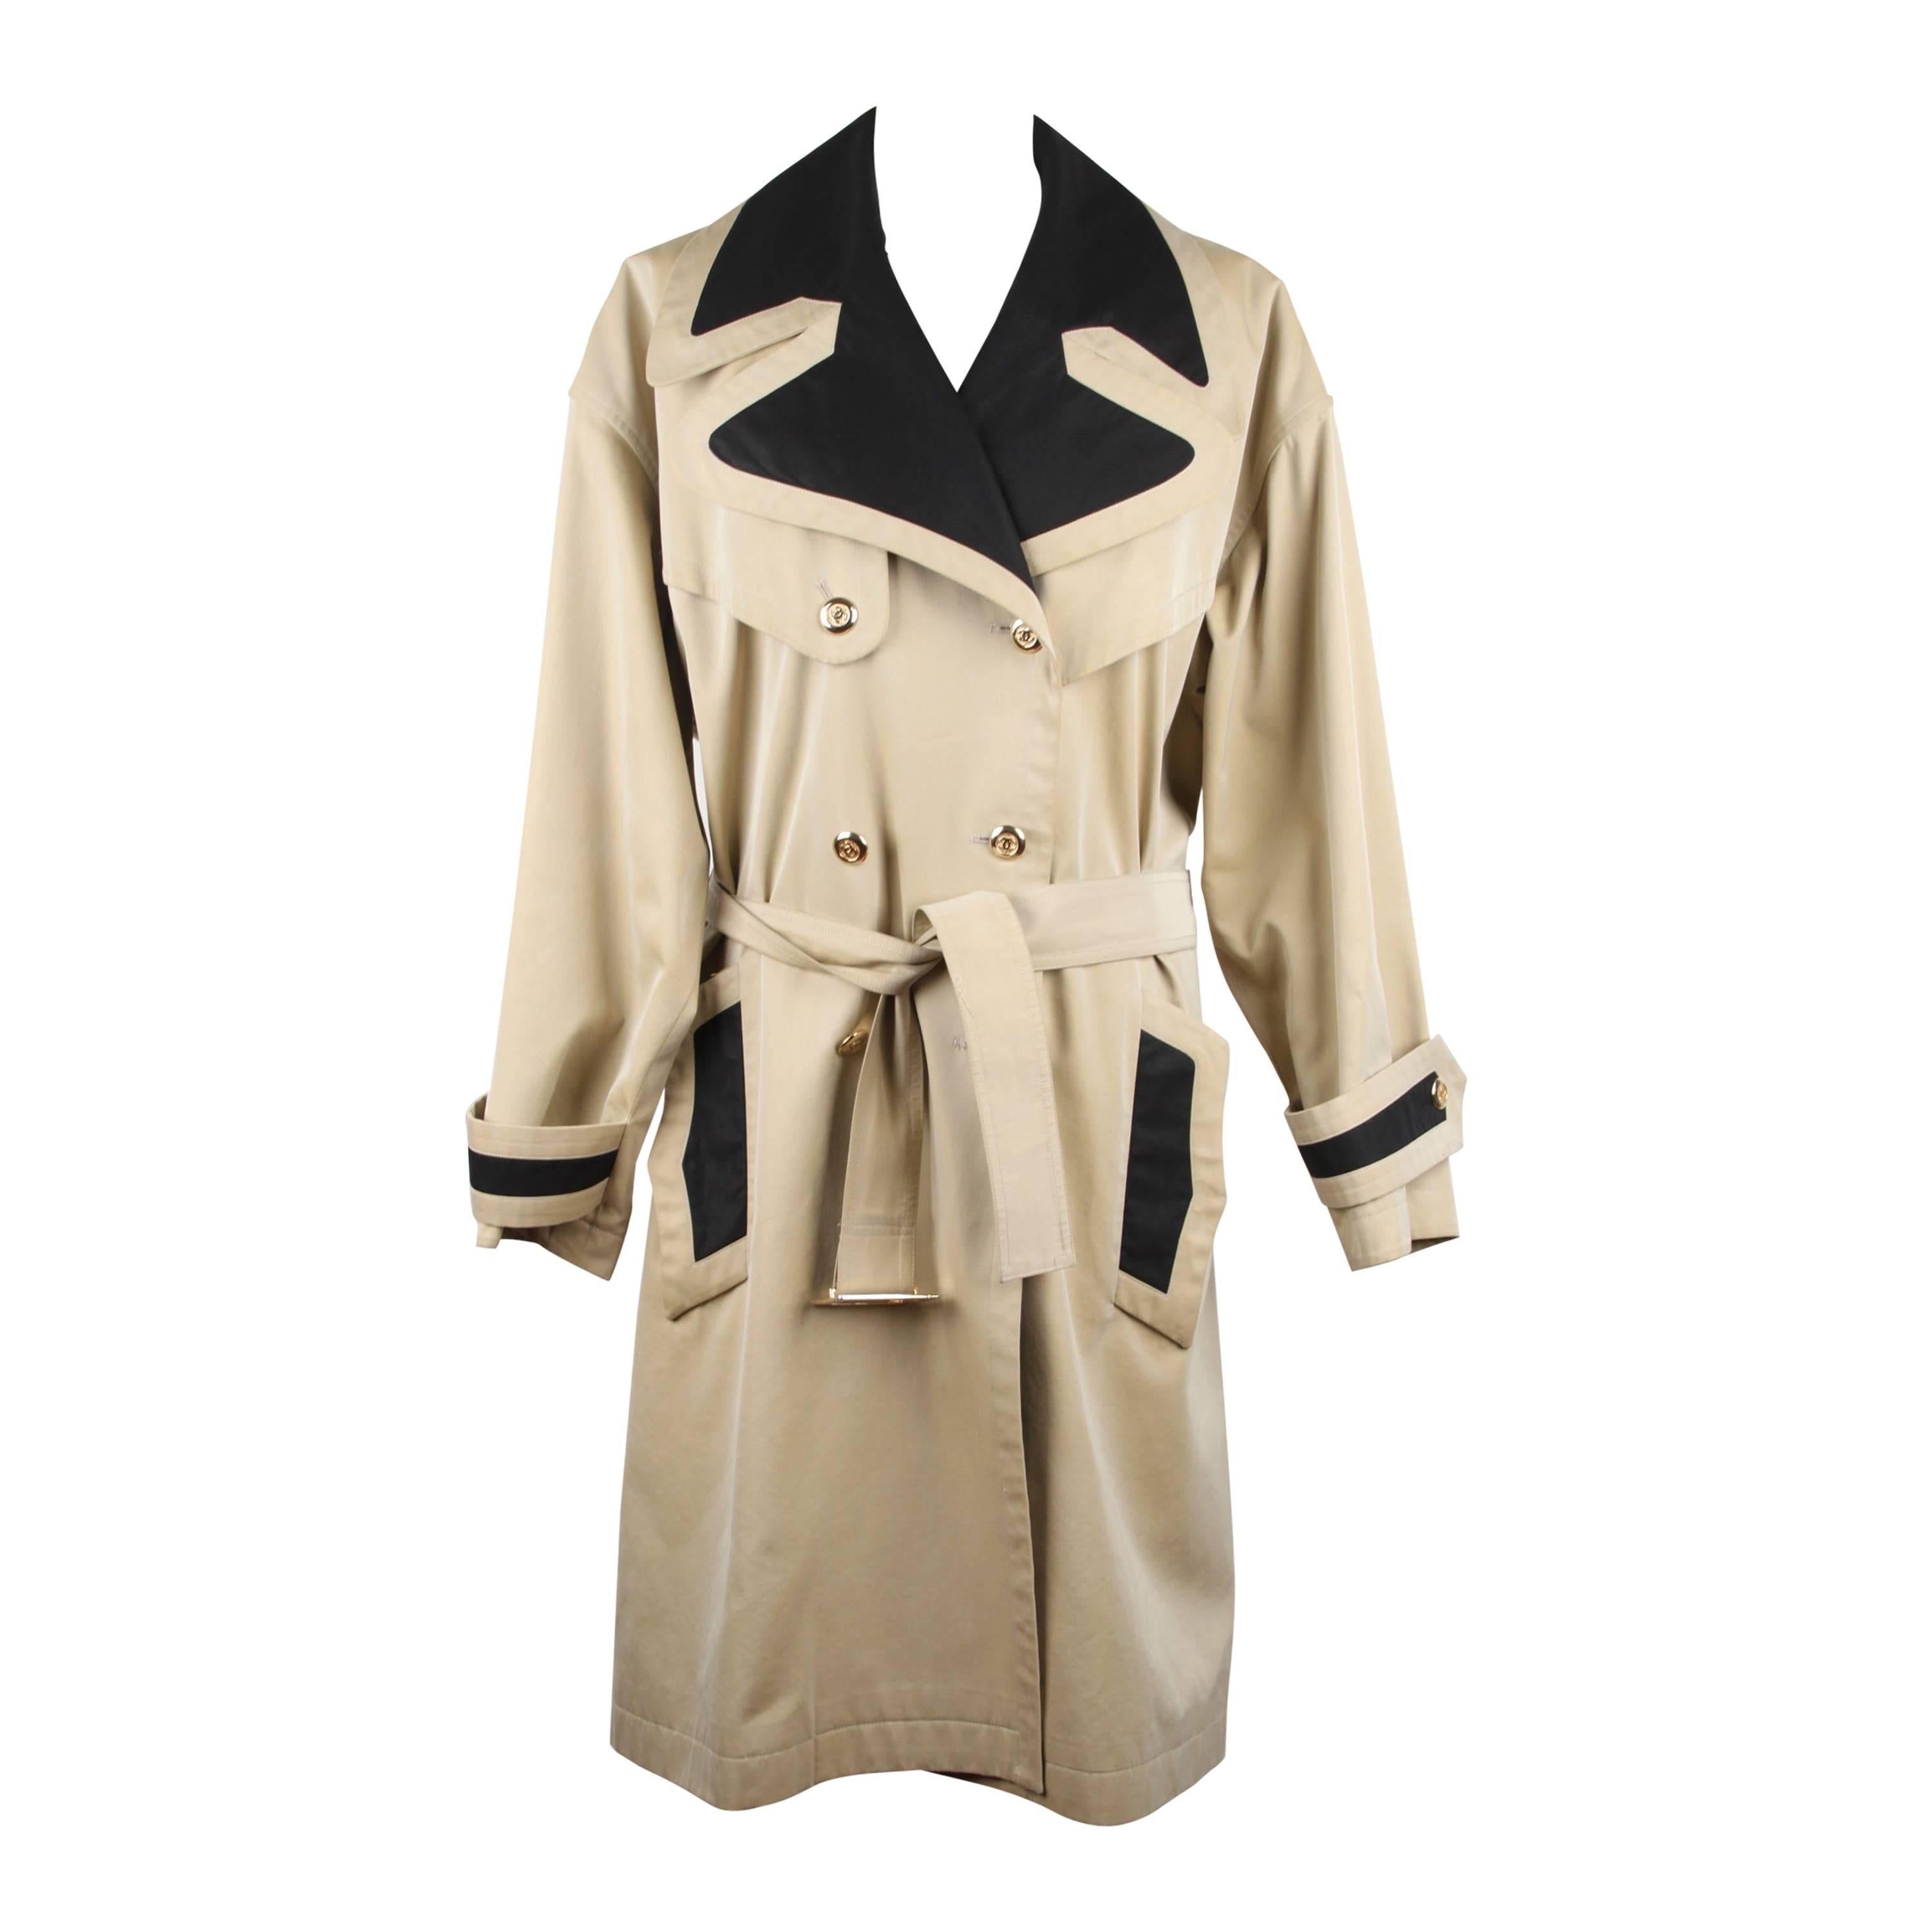 CHANEL BOUTIQUE Vintage Tan Cotton Double Breasted TRENCH COAT  Sz 36